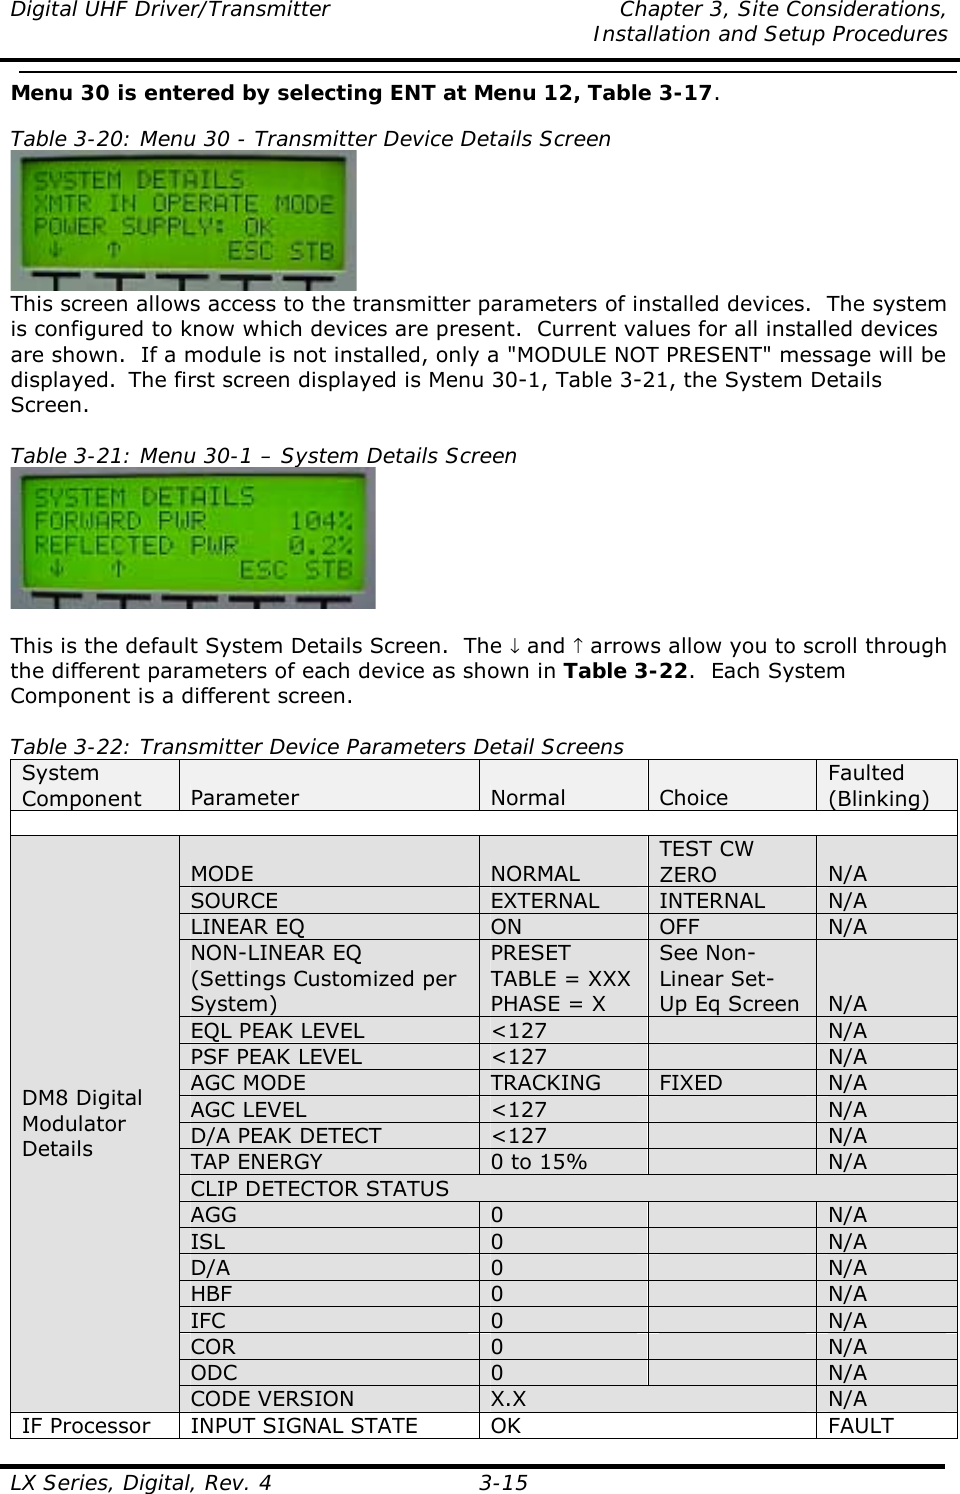 Digital UHF Driver/Transmitter  Chapter 3, Site Considerations,    Installation and Setup Procedures  LX Series, Digital, Rev. 4 3-15 Menu 30 is entered by selecting ENT at Menu 12, Table 3-17.  Table 3-20: Menu 30 - Transmitter Device Details Screen  This screen allows access to the transmitter parameters of installed devices.  The system is configured to know which devices are present.  Current values for all installed devices are shown.  If a module is not installed, only a &quot;MODULE NOT PRESENT&quot; message will be displayed.  The first screen displayed is Menu 30-1, Table 3-21, the System Details Screen.  Table 3-21: Menu 30-1 – System Details Screen   This is the default System Details Screen.  The ↓ and ↑ arrows allow you to scroll through the different parameters of each device as shown in Table 3-22.  Each System Component is a different screen.  Table 3-22: Transmitter Device Parameters Detail Screens System Component  Parameter  Normal  Choice Faulted (Blinking)  MODE  NORMAL TEST CW ZERO  N/A SOURCE  EXTERNAL  INTERNAL  N/A LINEAR EQ  ON  OFF  N/A NON-LINEAR EQ (Settings Customized per System) PRESET TABLE = XXX PHASE = X See Non-Linear Set- Up Eq Screen  N/A EQL PEAK LEVEL  &lt;127   N/A PSF PEAK LEVEL  &lt;127   N/A AGC MODE  TRACKING  FIXED  N/A AGC LEVEL  &lt;127   N/A D/A PEAK DETECT  &lt;127   N/A TAP ENERGY  0 to 15%   N/A CLIP DETECTOR STATUS AGG  0   N/A ISL  0   N/A D/A  0   N/A HBF  0   N/A IFC  0   N/A COR  0   N/A ODC  0   N/A DM8 Digital Modulator Details CODE VERSION  X.X  N/A IF Processor  INPUT SIGNAL STATE  OK  FAULT 